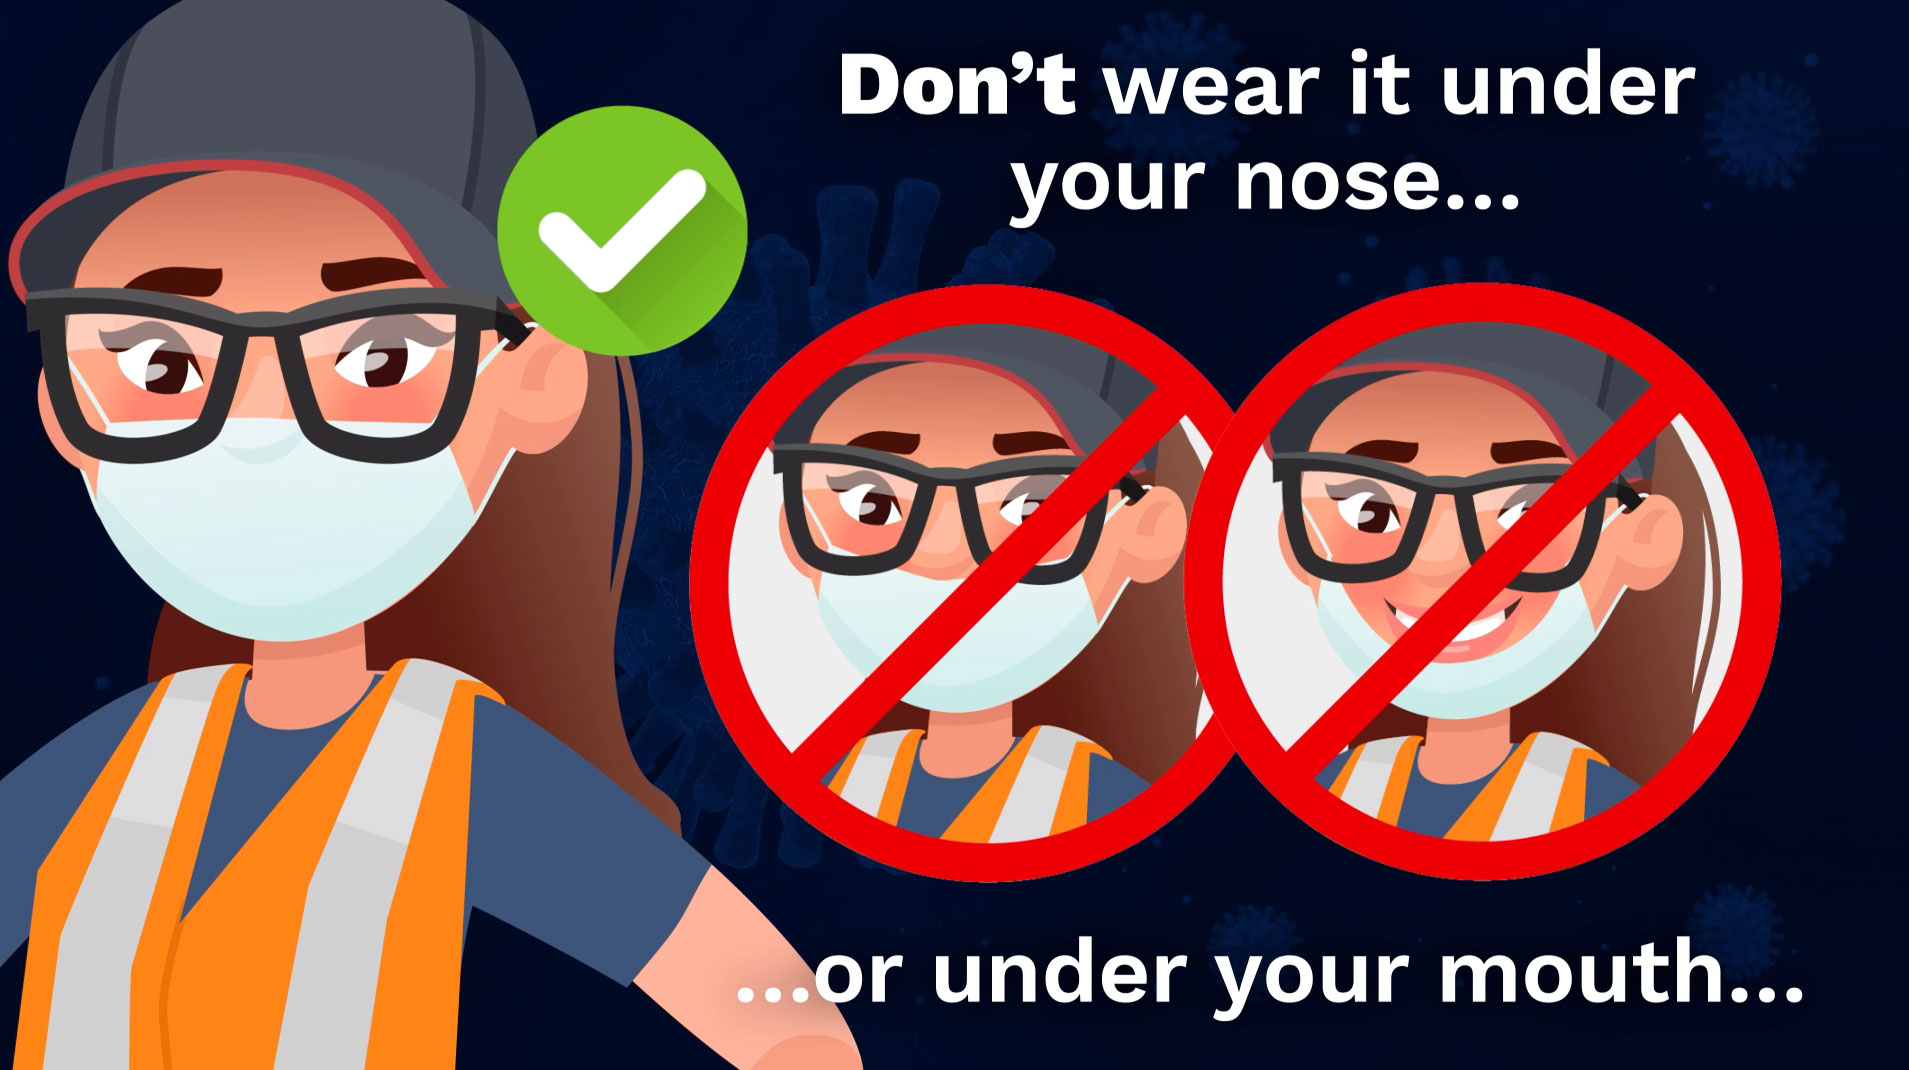 Workers urged to use face coverings in correct manner in new video campaign